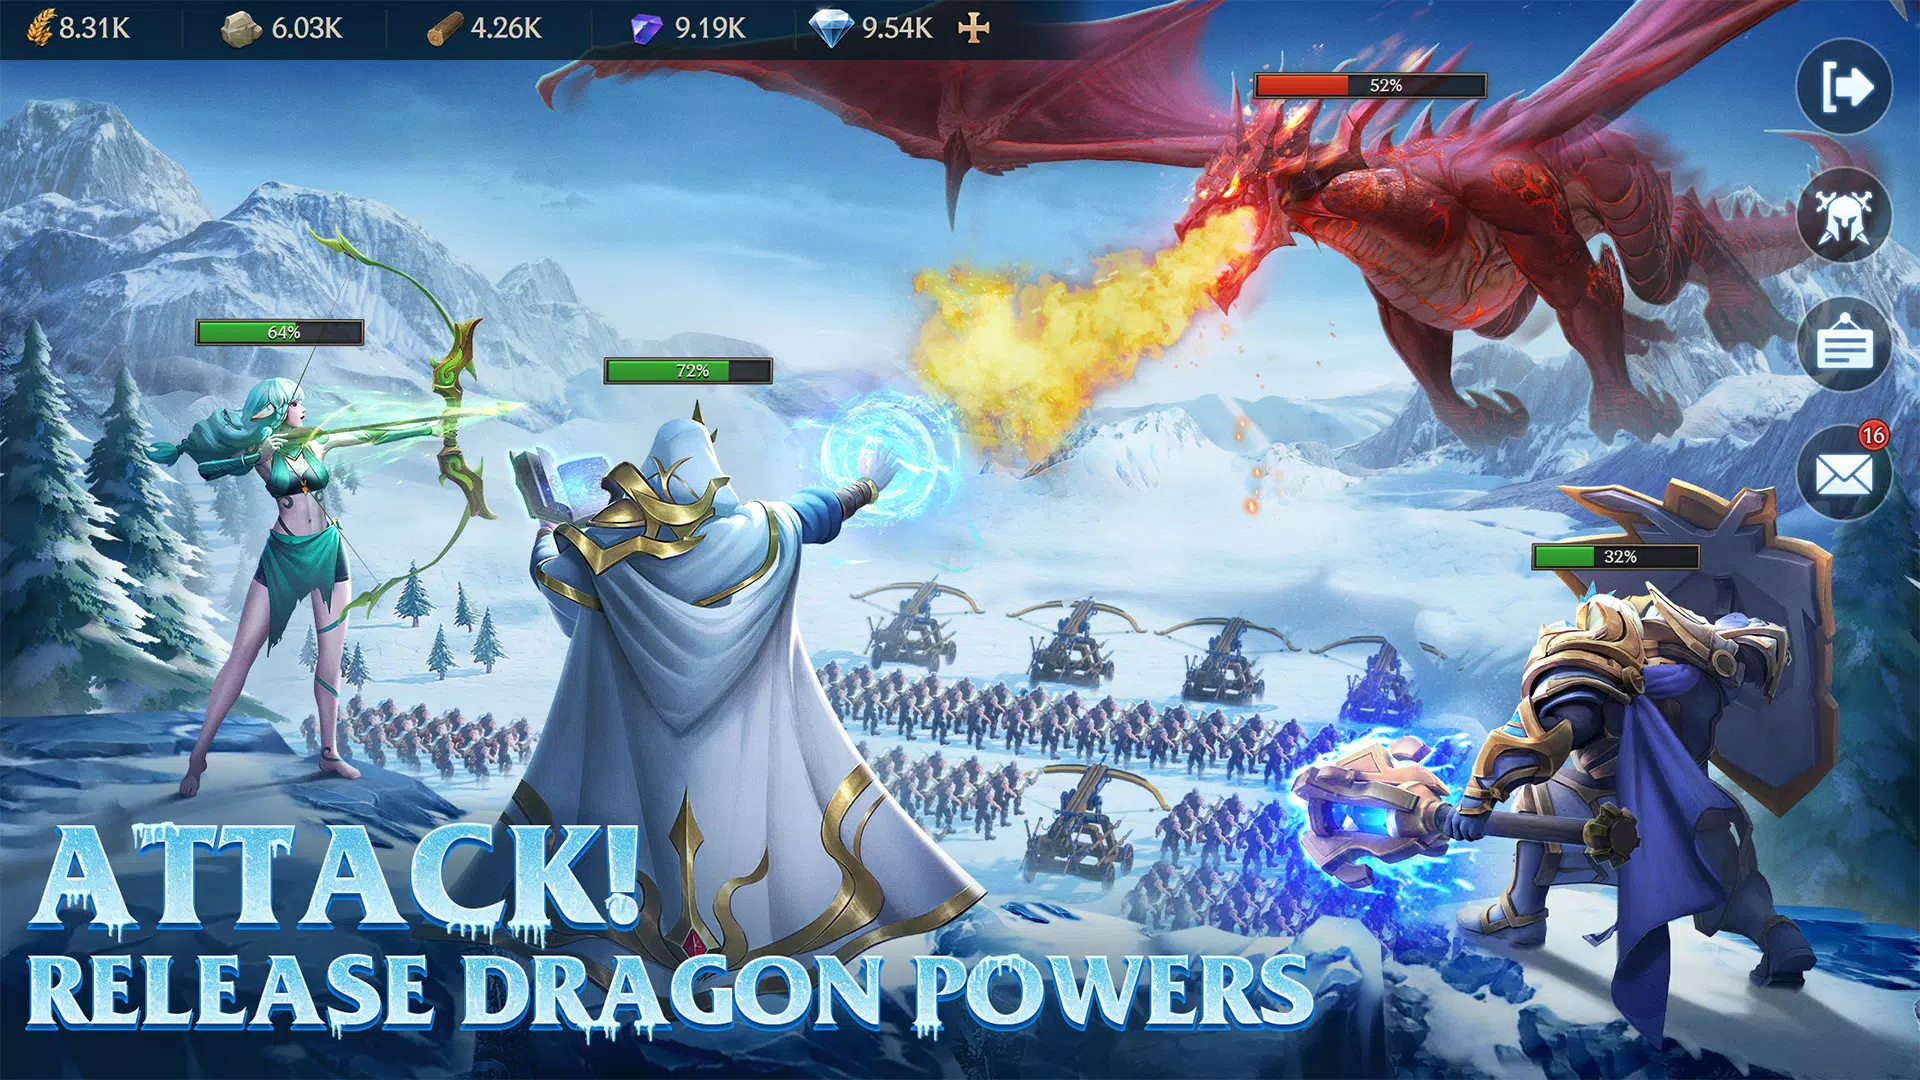 Download Puzzles & Chaos: Frozen Castle APK v1.18.01 For Android